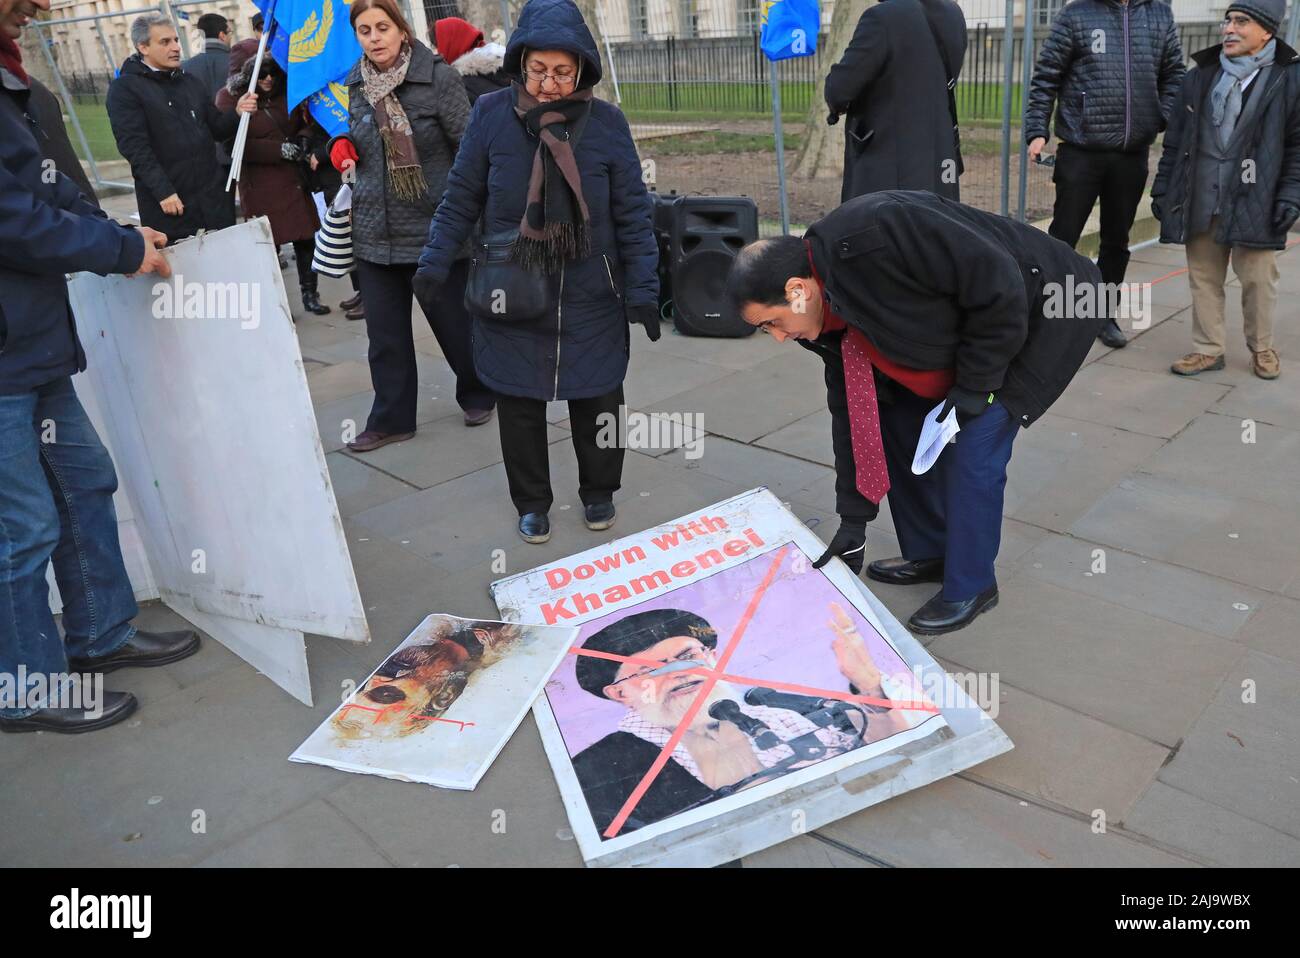 Protesters outside Downing Street in London after the US killed General Qassem Soleimani in a drone strike at Baghdad's international airport. Soleimani was head of Tehran's elite Quds Force and Iran's top general. Stock Photo